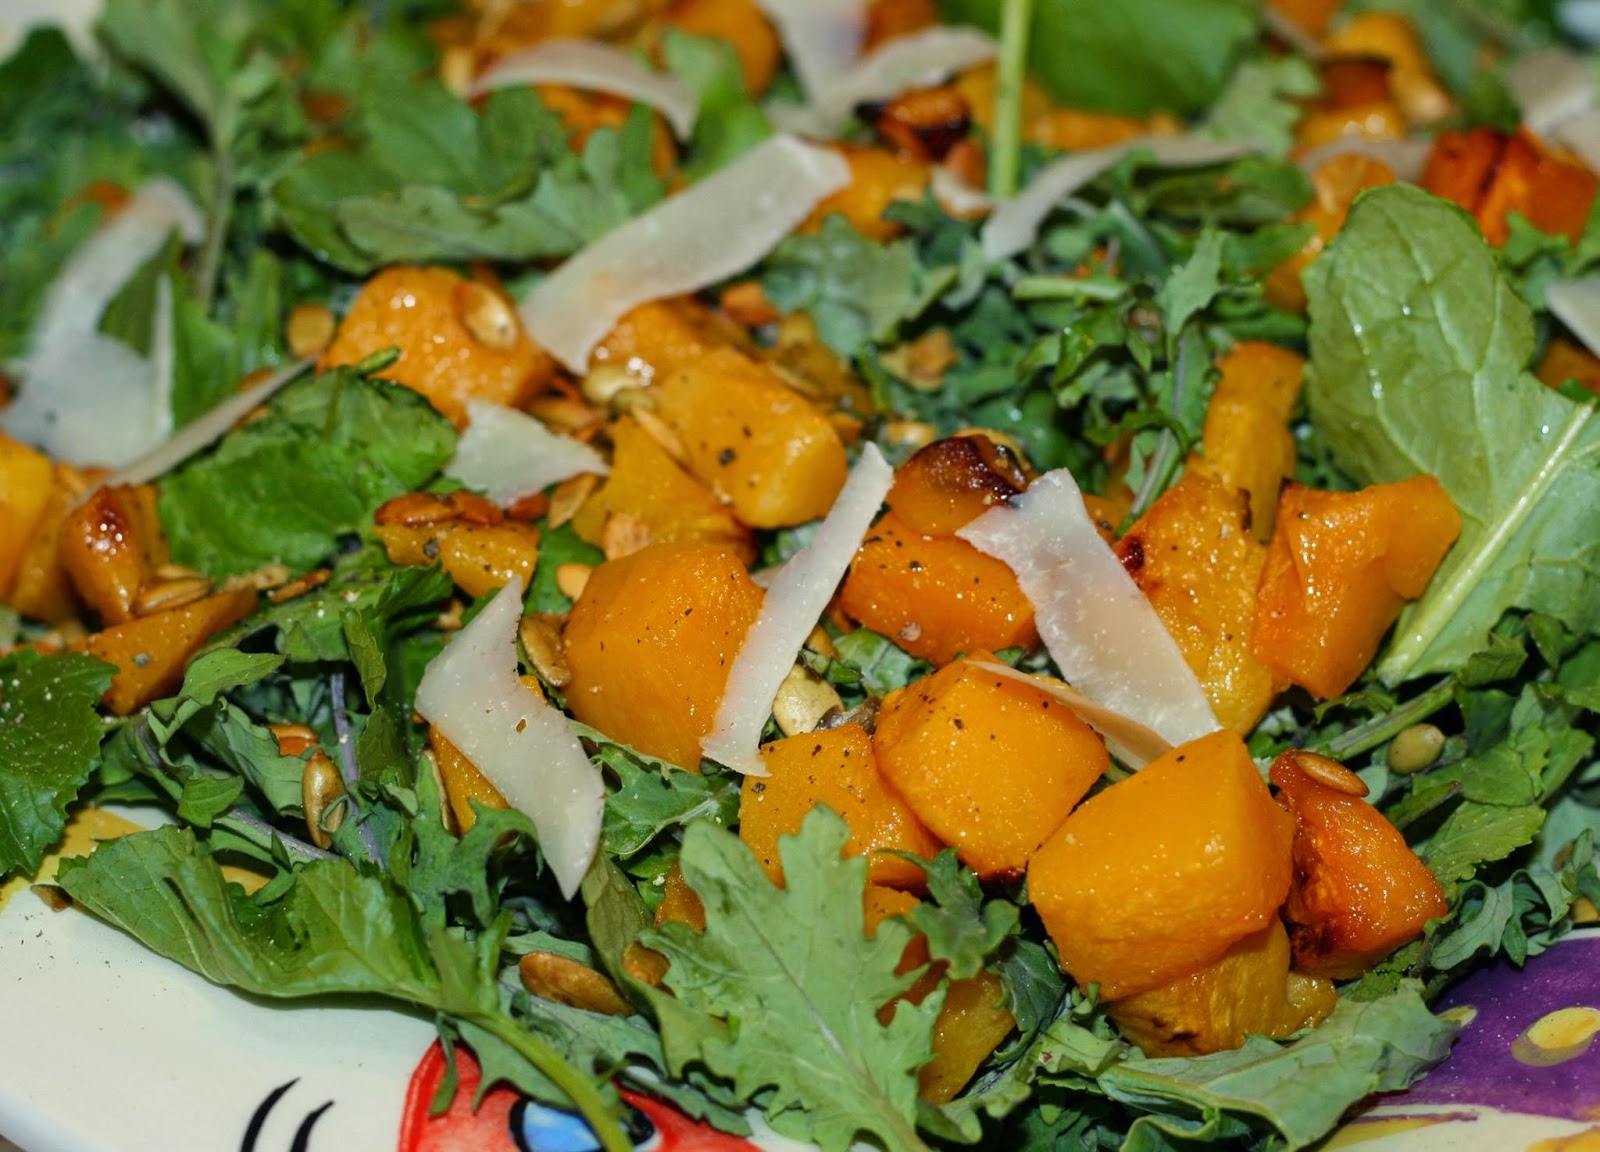 Image of Salad- Organic Kale, Quinoa, and Roasted Butternut Squash  with Toasted Pumpkin Seeds